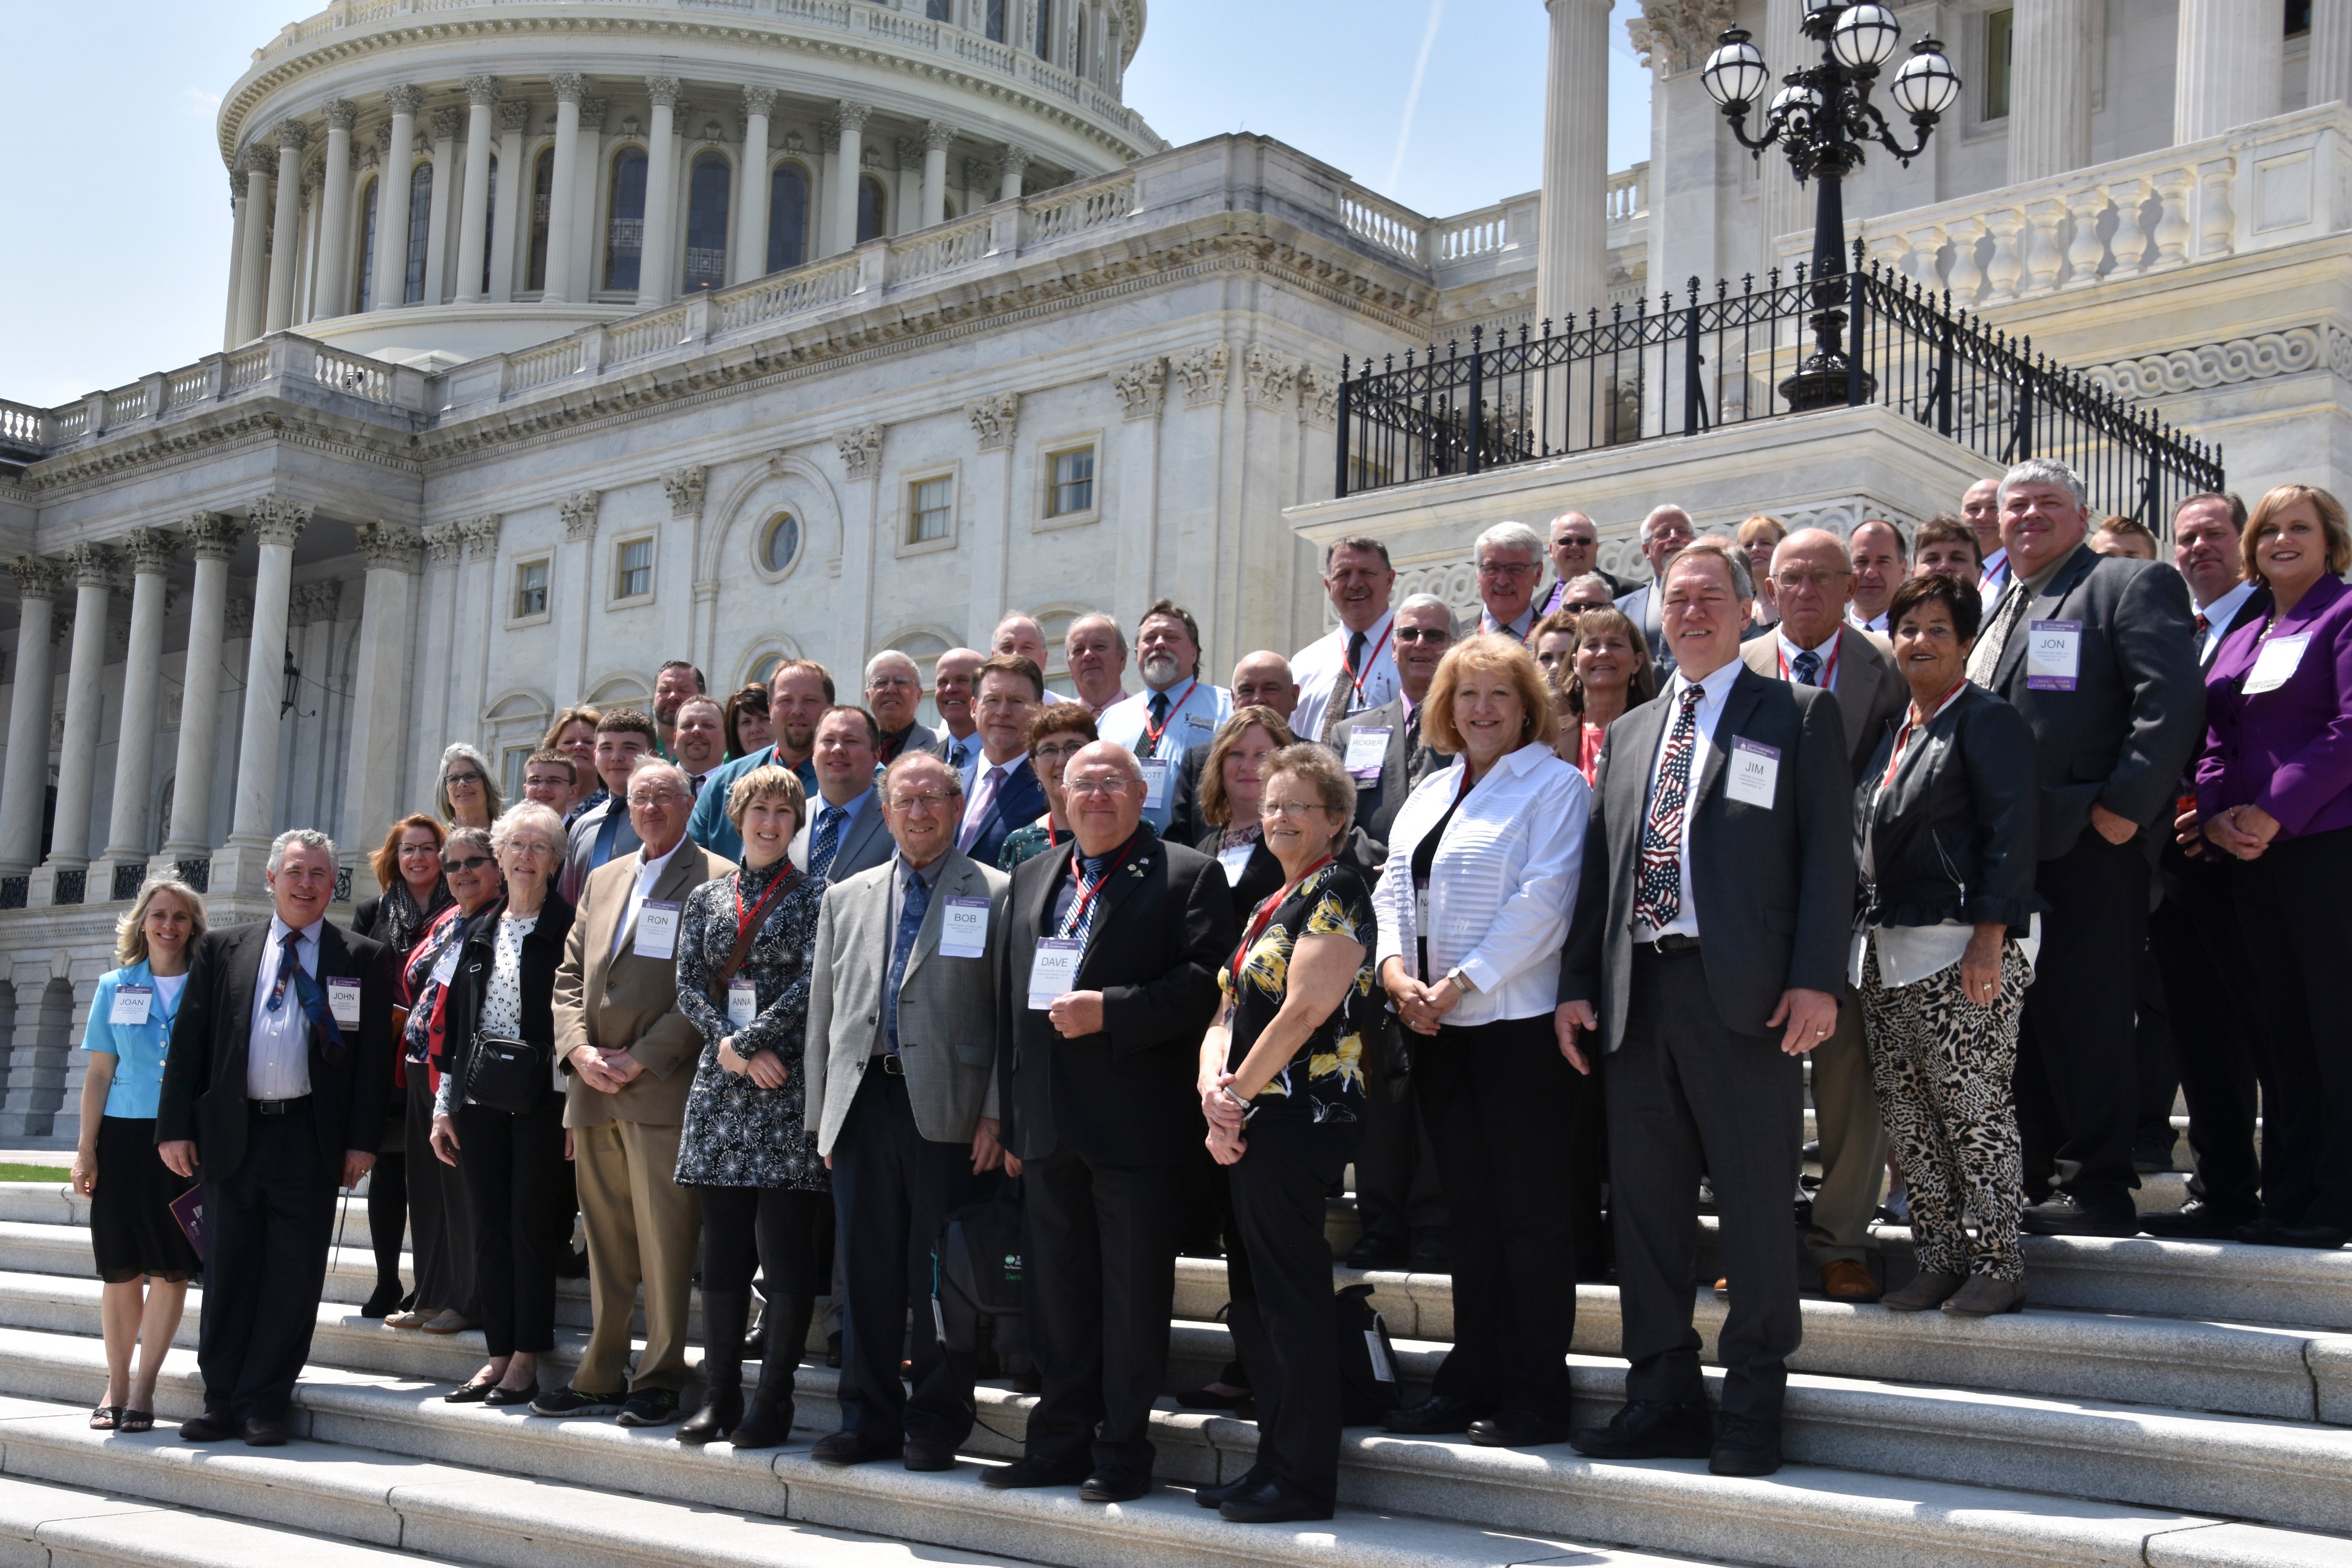 The Wisconsin delegation on the Capitol steps.